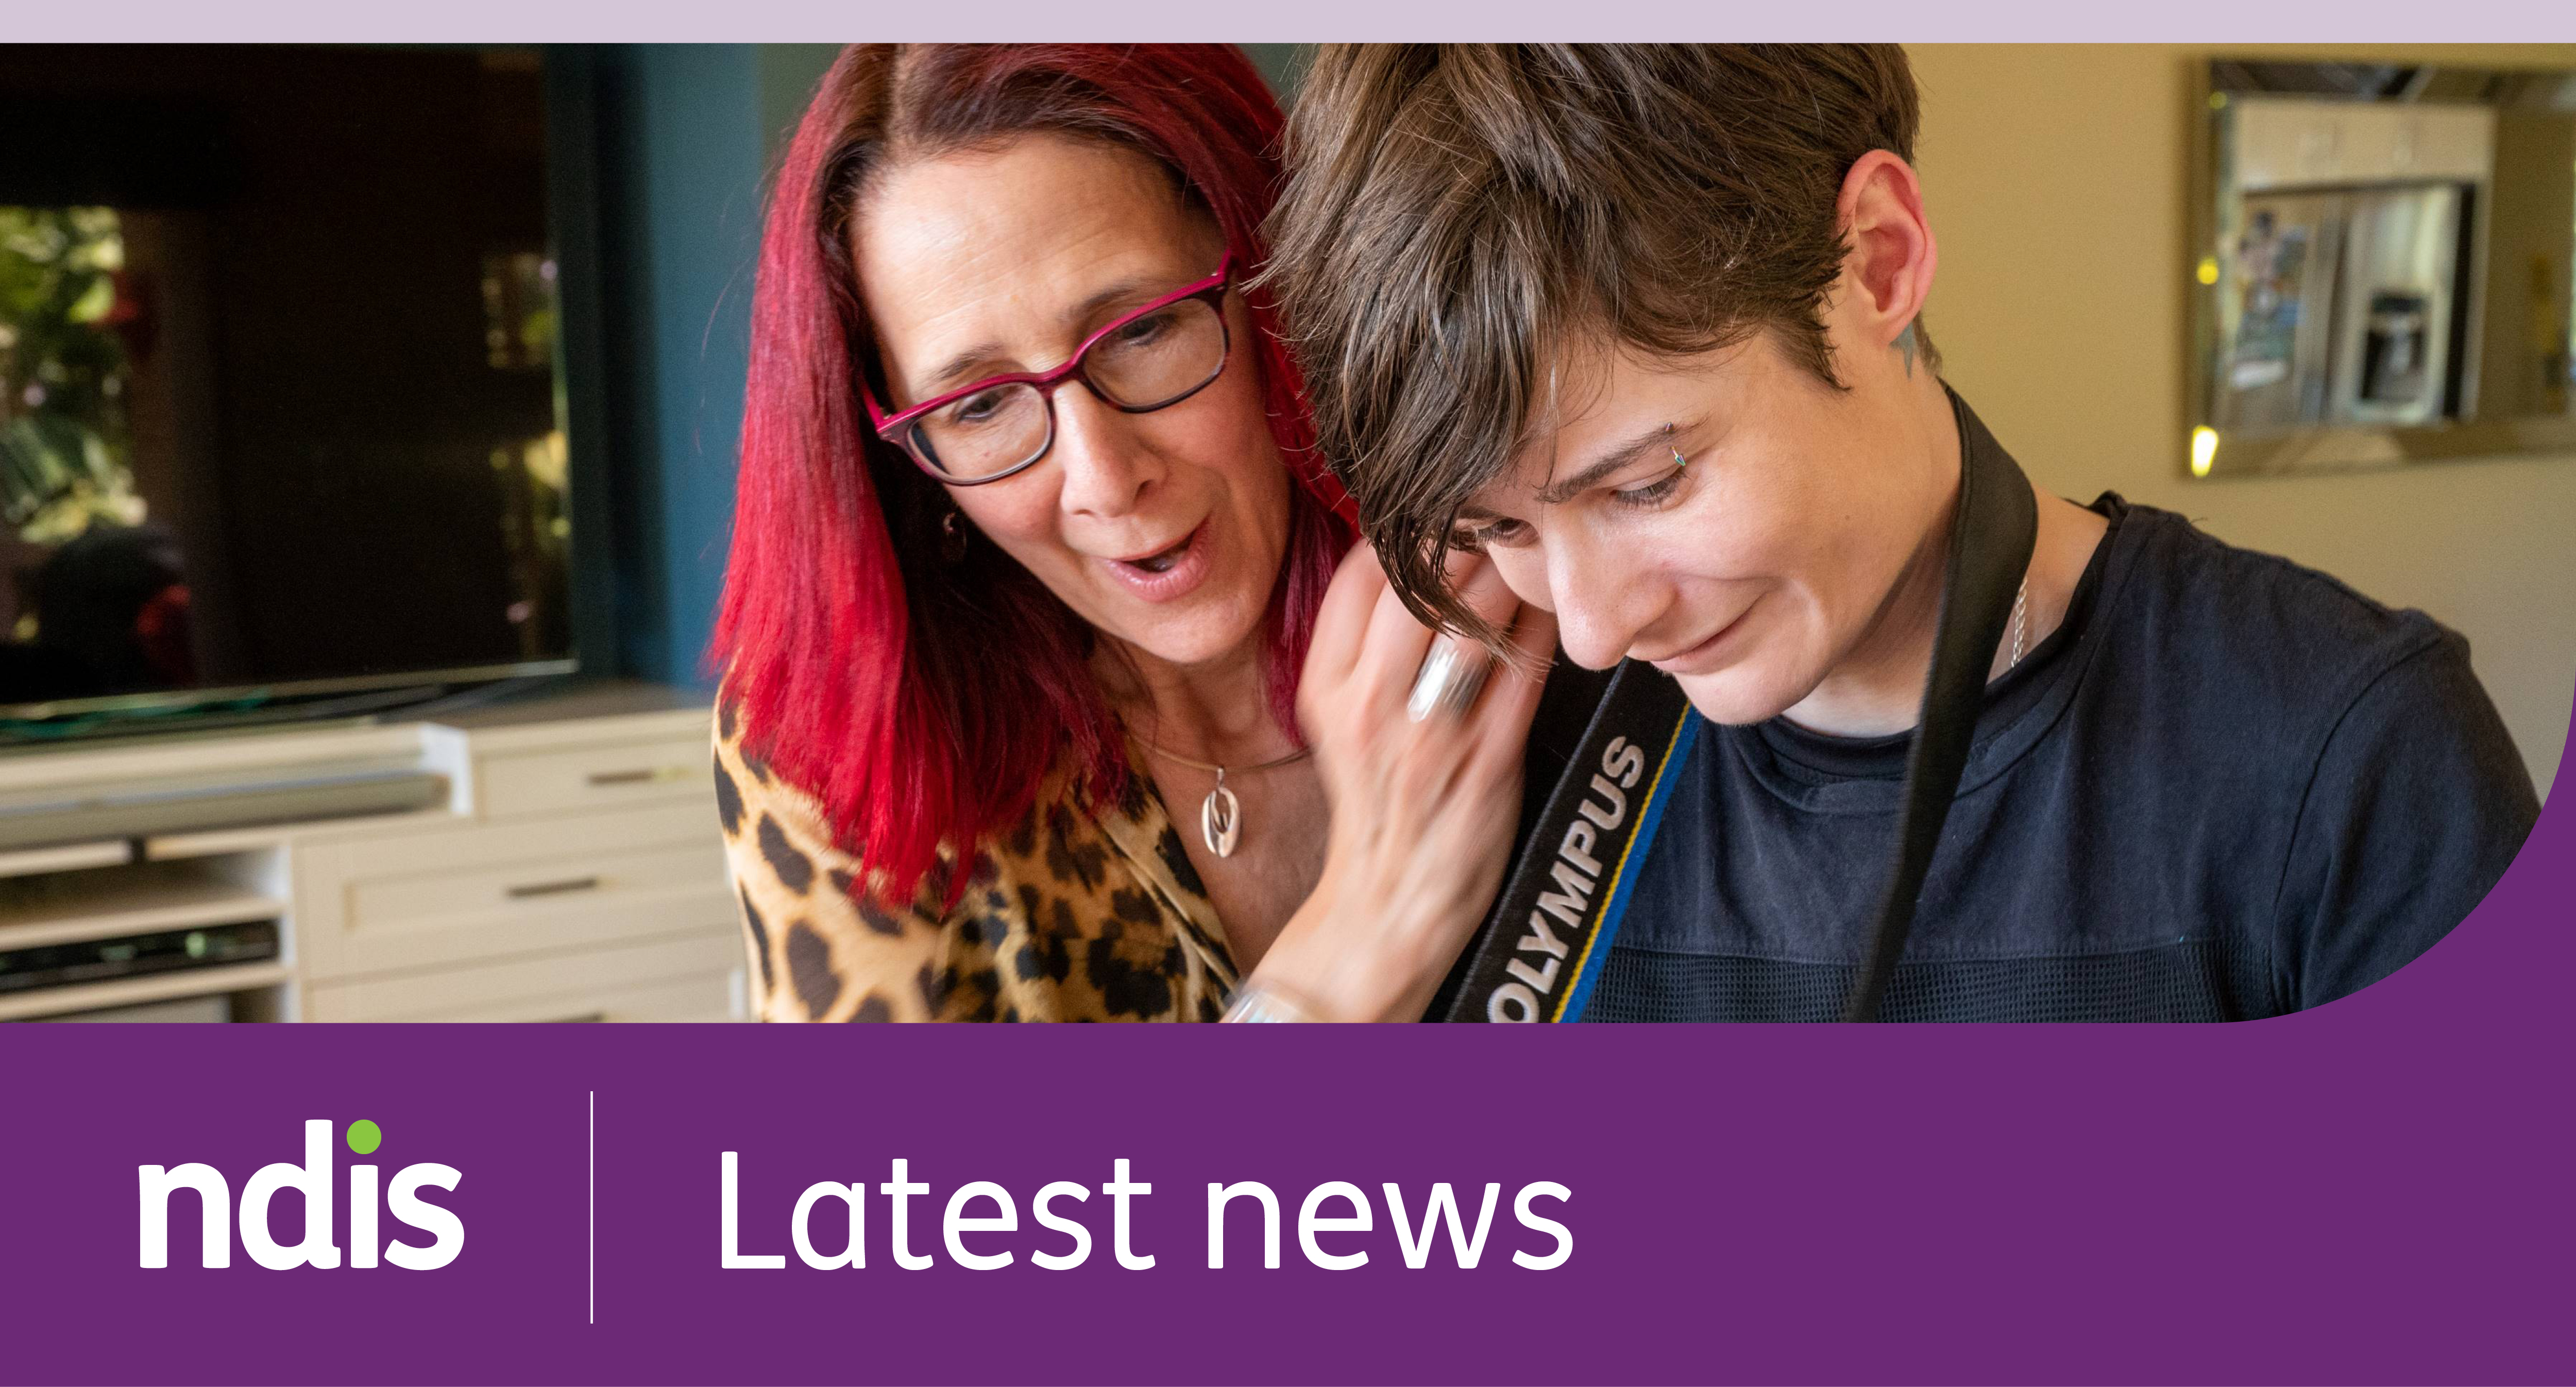 NDIS | Latest news with a picture of 2 people looking at a camera and smiling